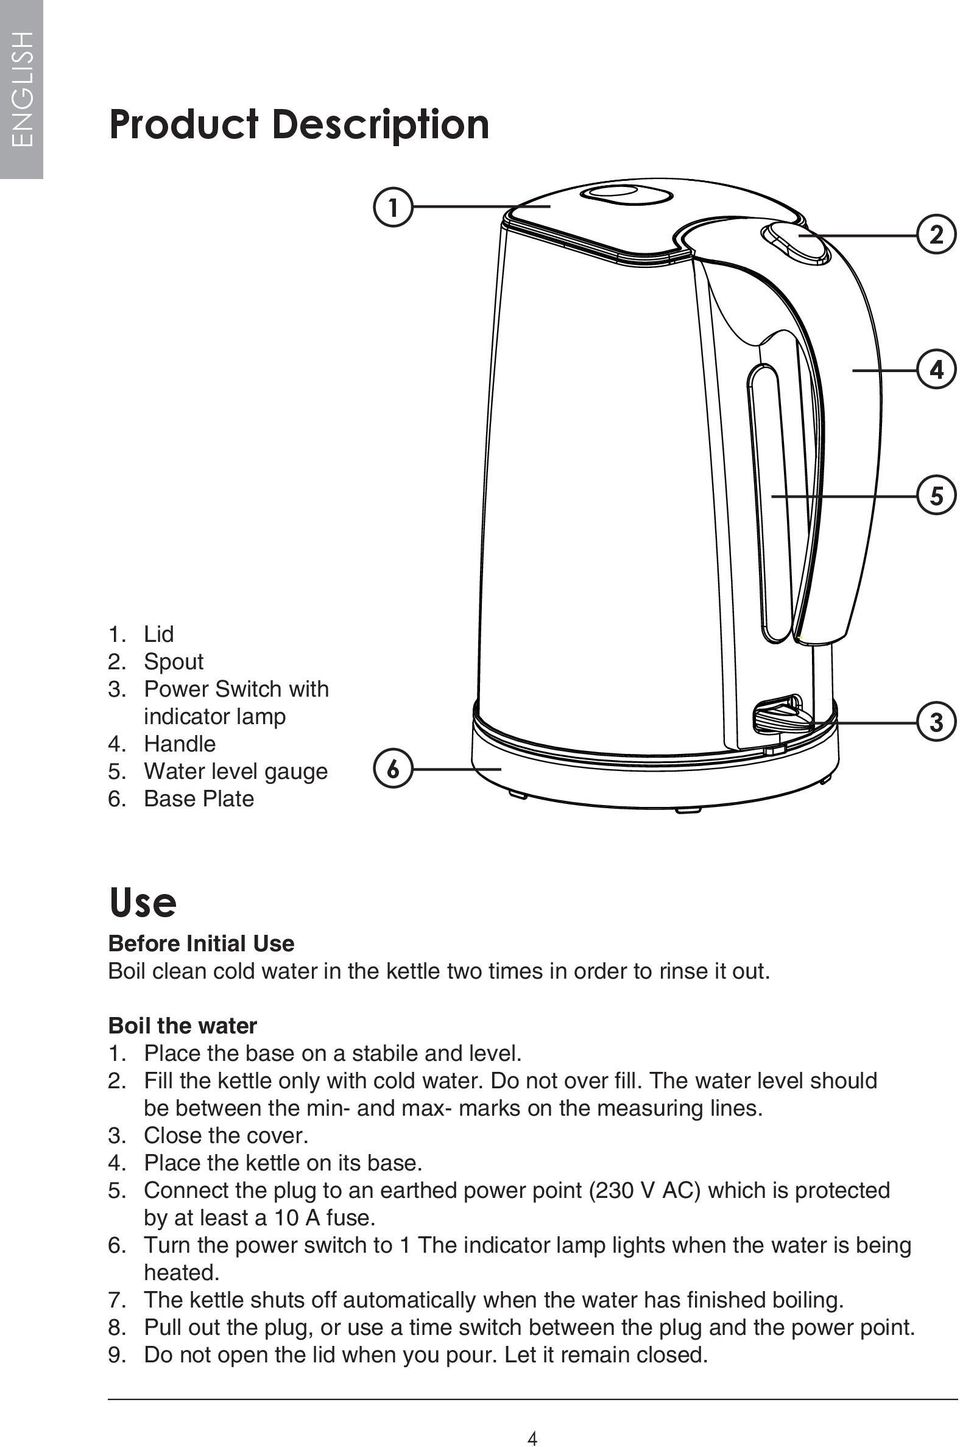 Fill the kettle only with cold water. Do not over fill. The water level should be between the min- and max- marks on the measuring lines. 3. Close the cover. 4. Place the kettle on its base. 5.